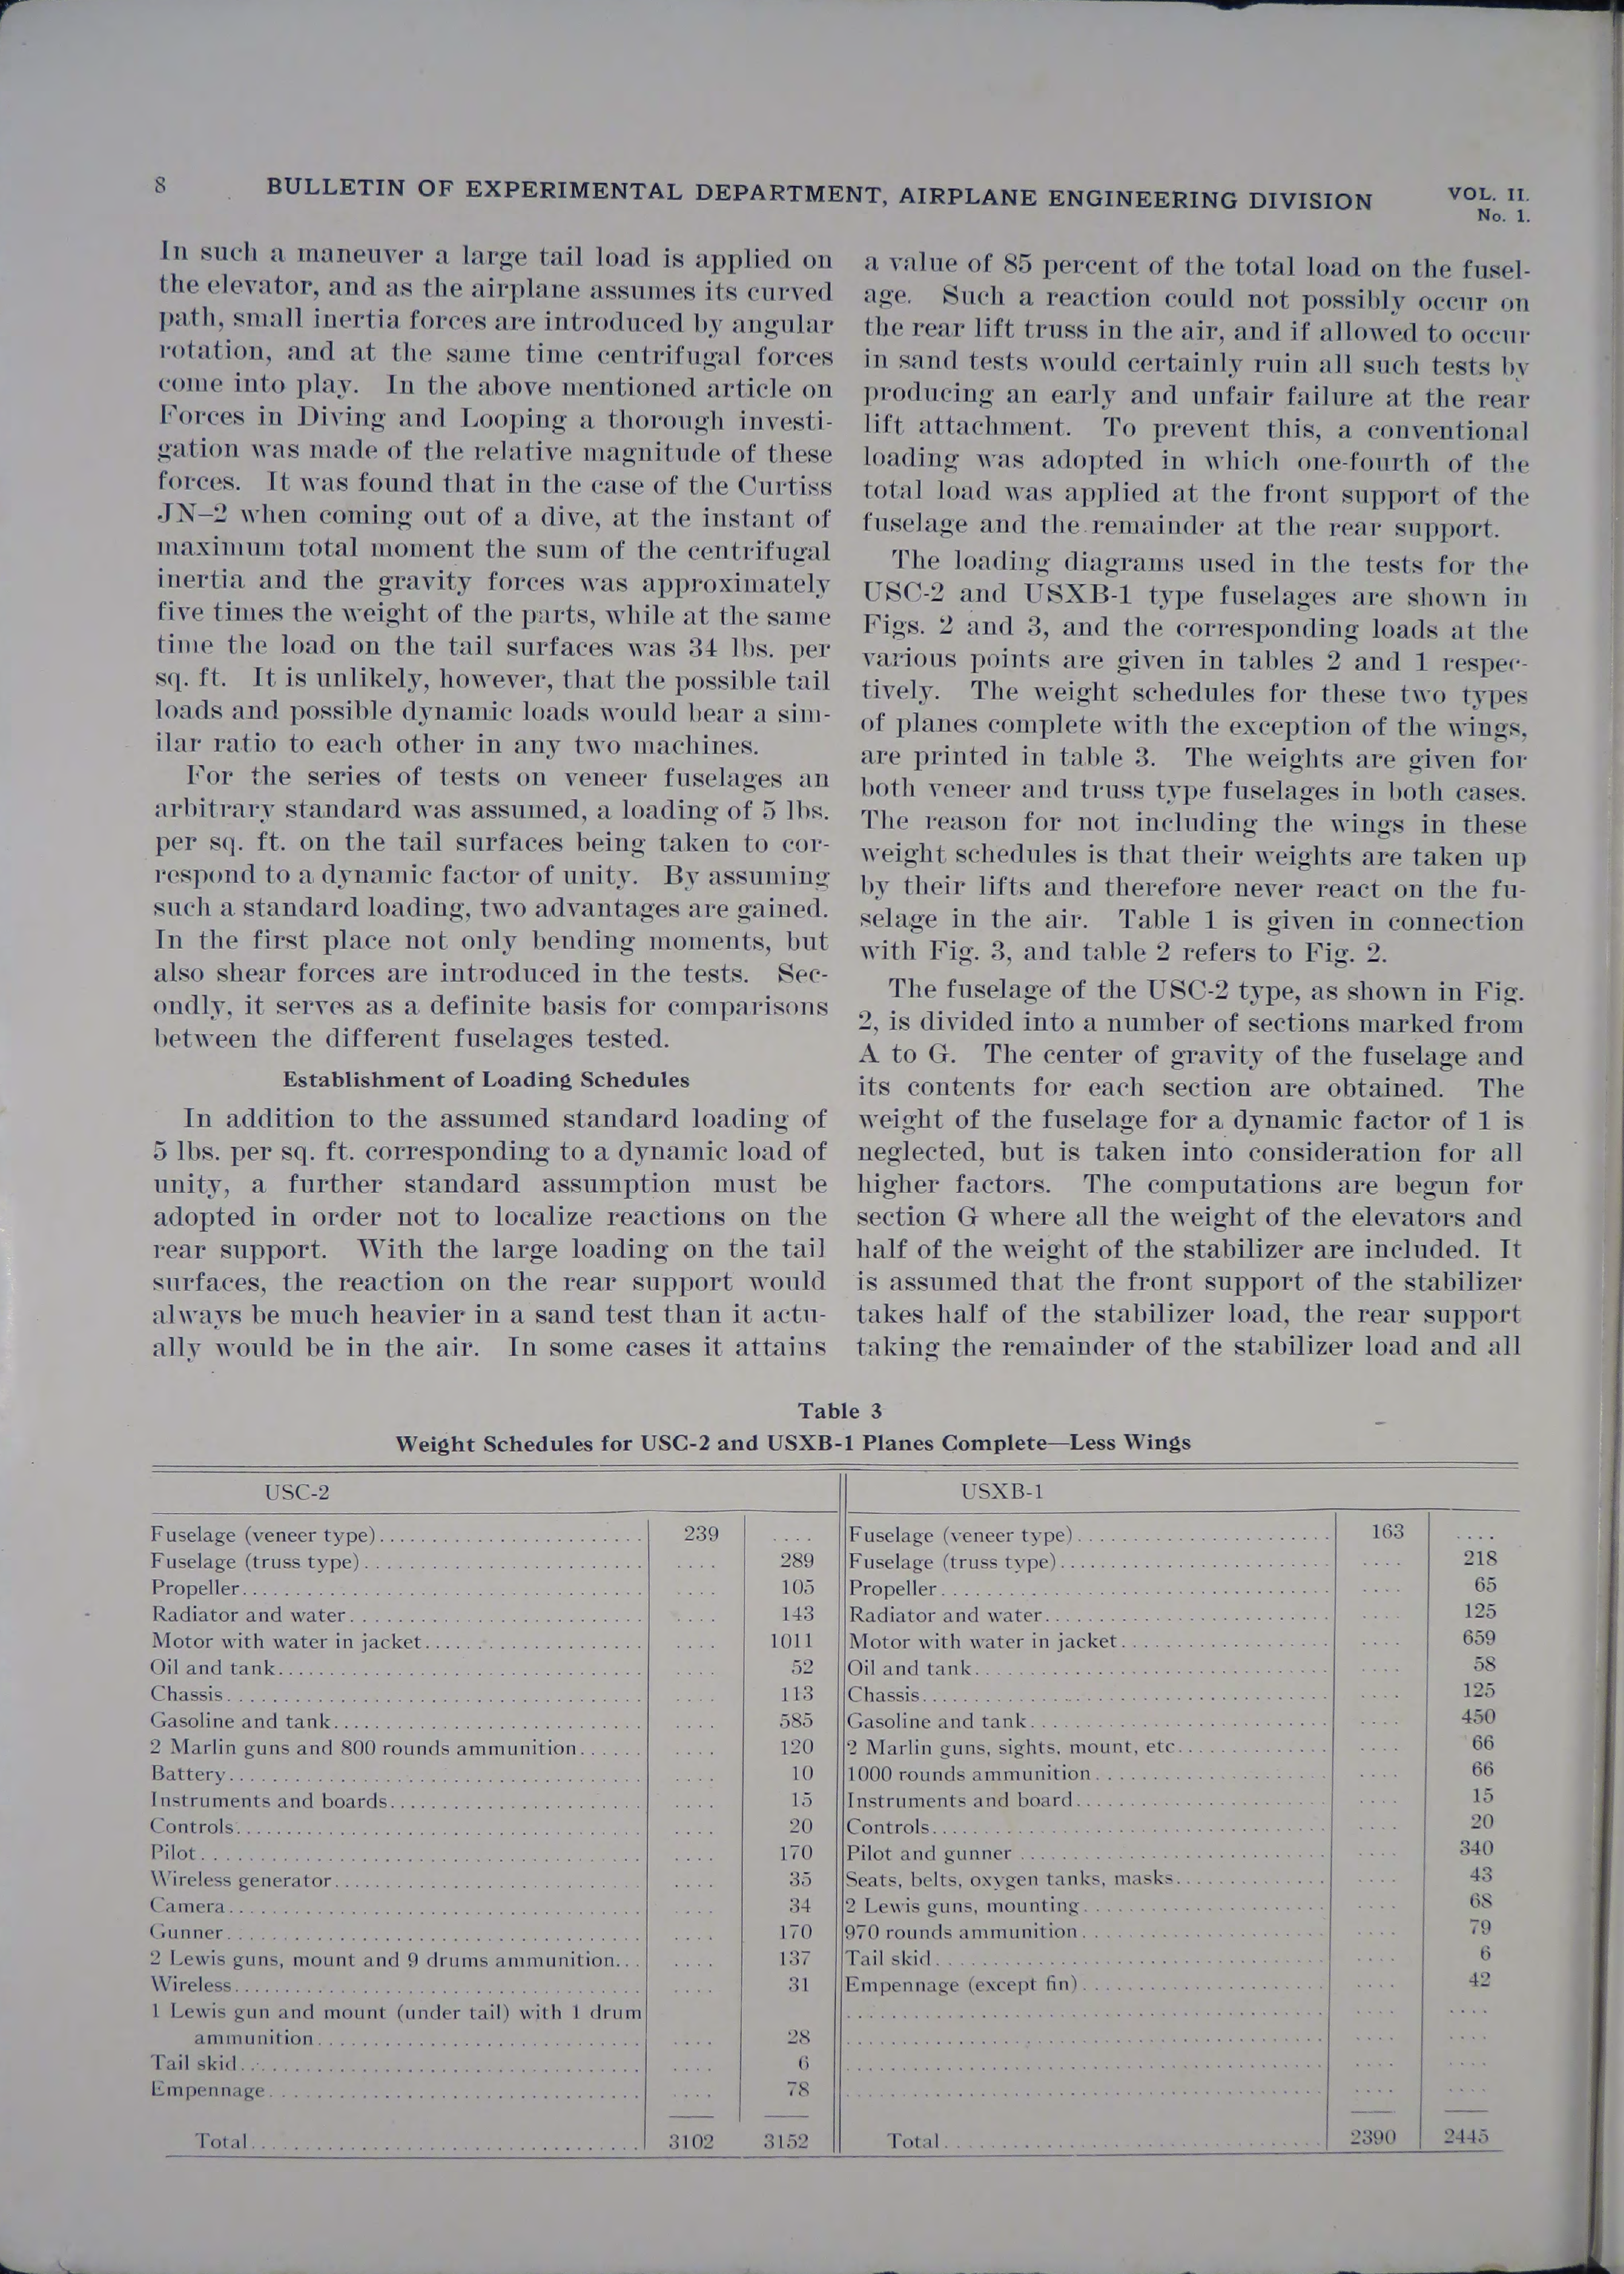 Sample page 8 from AirCorps Library document: Bulletin on the Experimental Department of Airplane Engineering Division